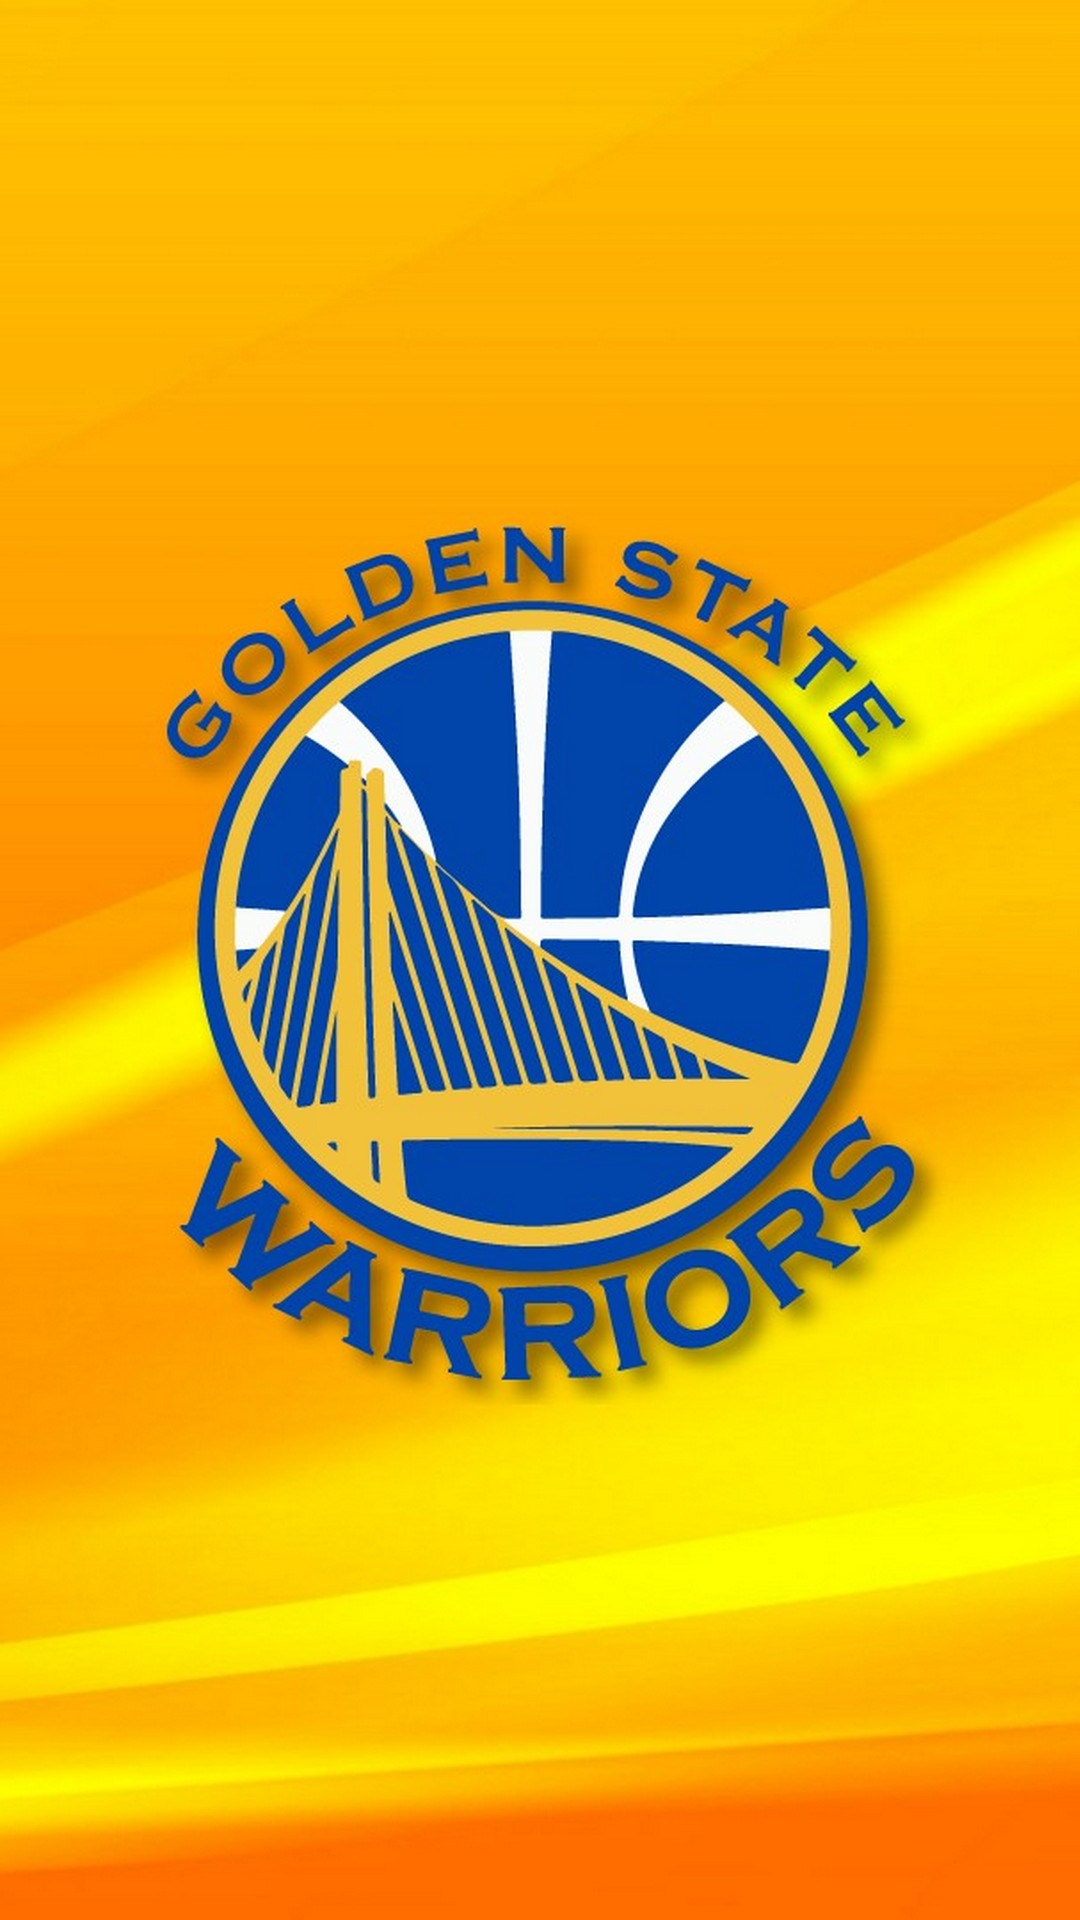 Golden State Wallpaper For Mobile with image dimensions 1080x1920 pixel. You can make this wallpaper for your Desktop Computer Backgrounds, Windows or Mac Screensavers, iPhone Lock screen, Tablet or Android and another Mobile Phone device